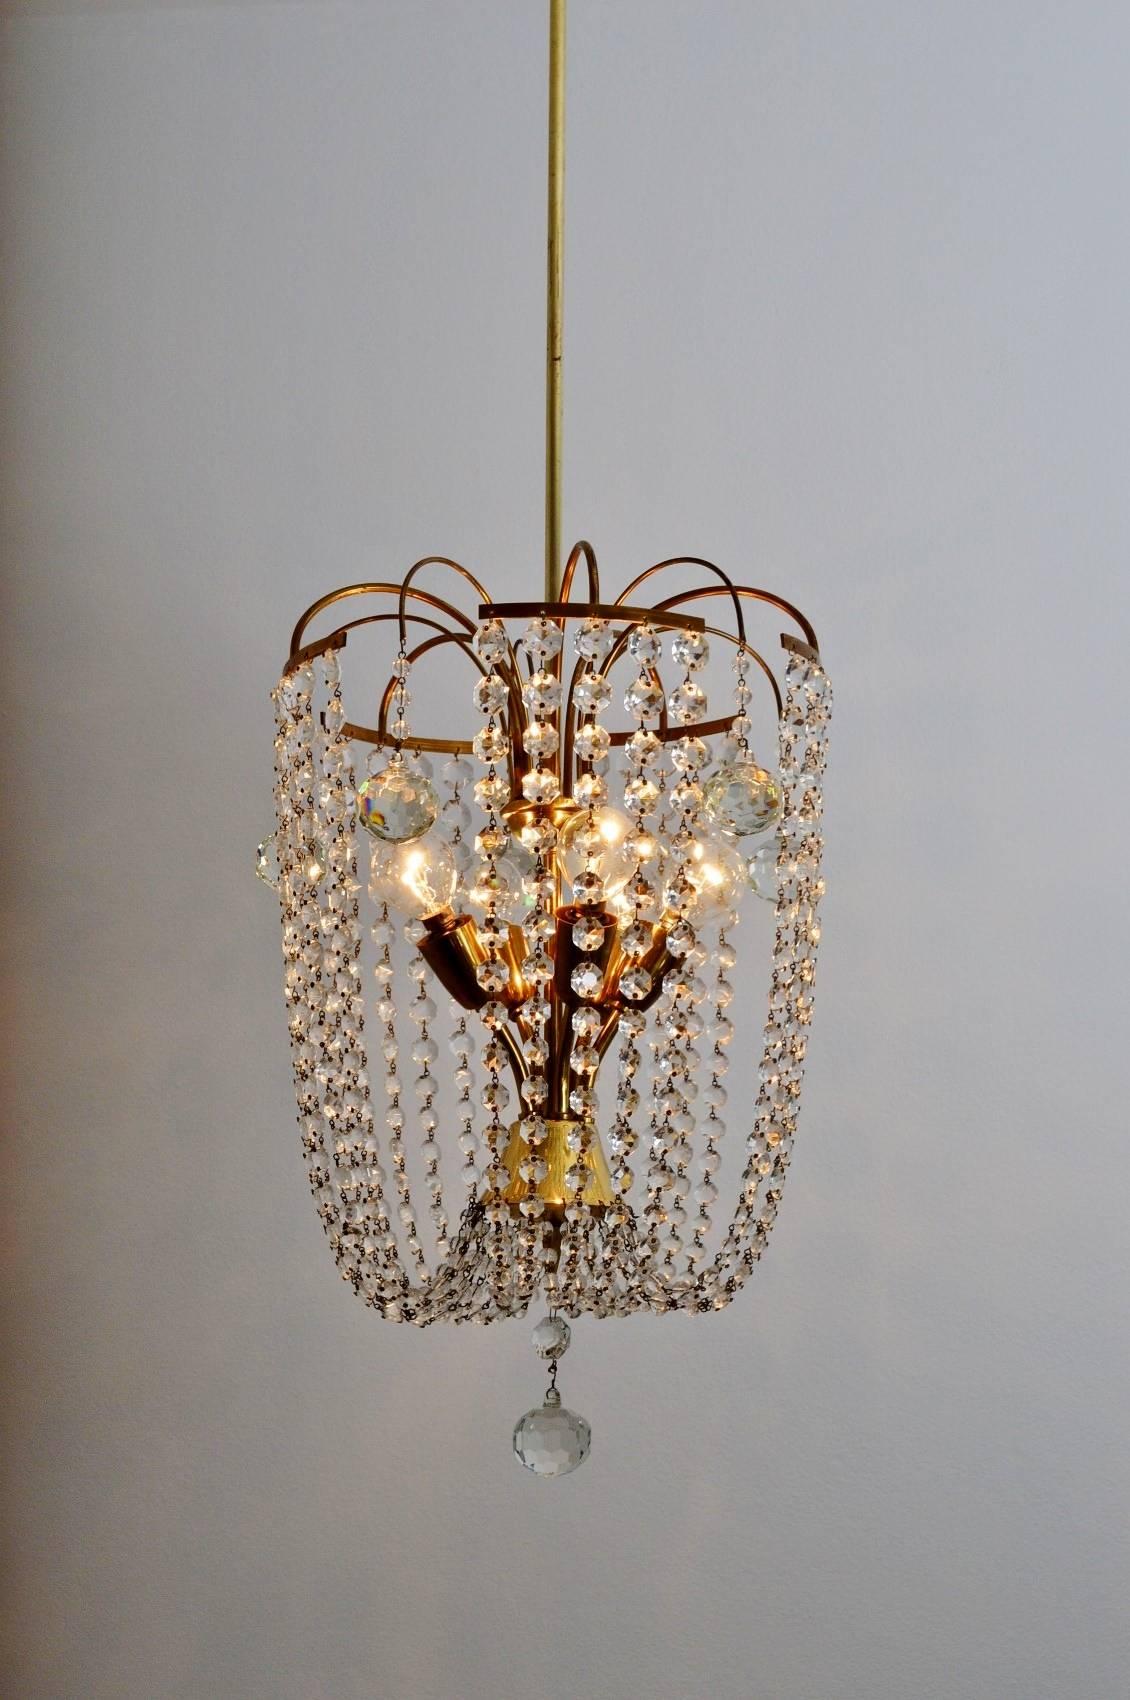 Polished Austrian Midcentury Crystal Glass and Brass Chandelier, 1950s For Sale